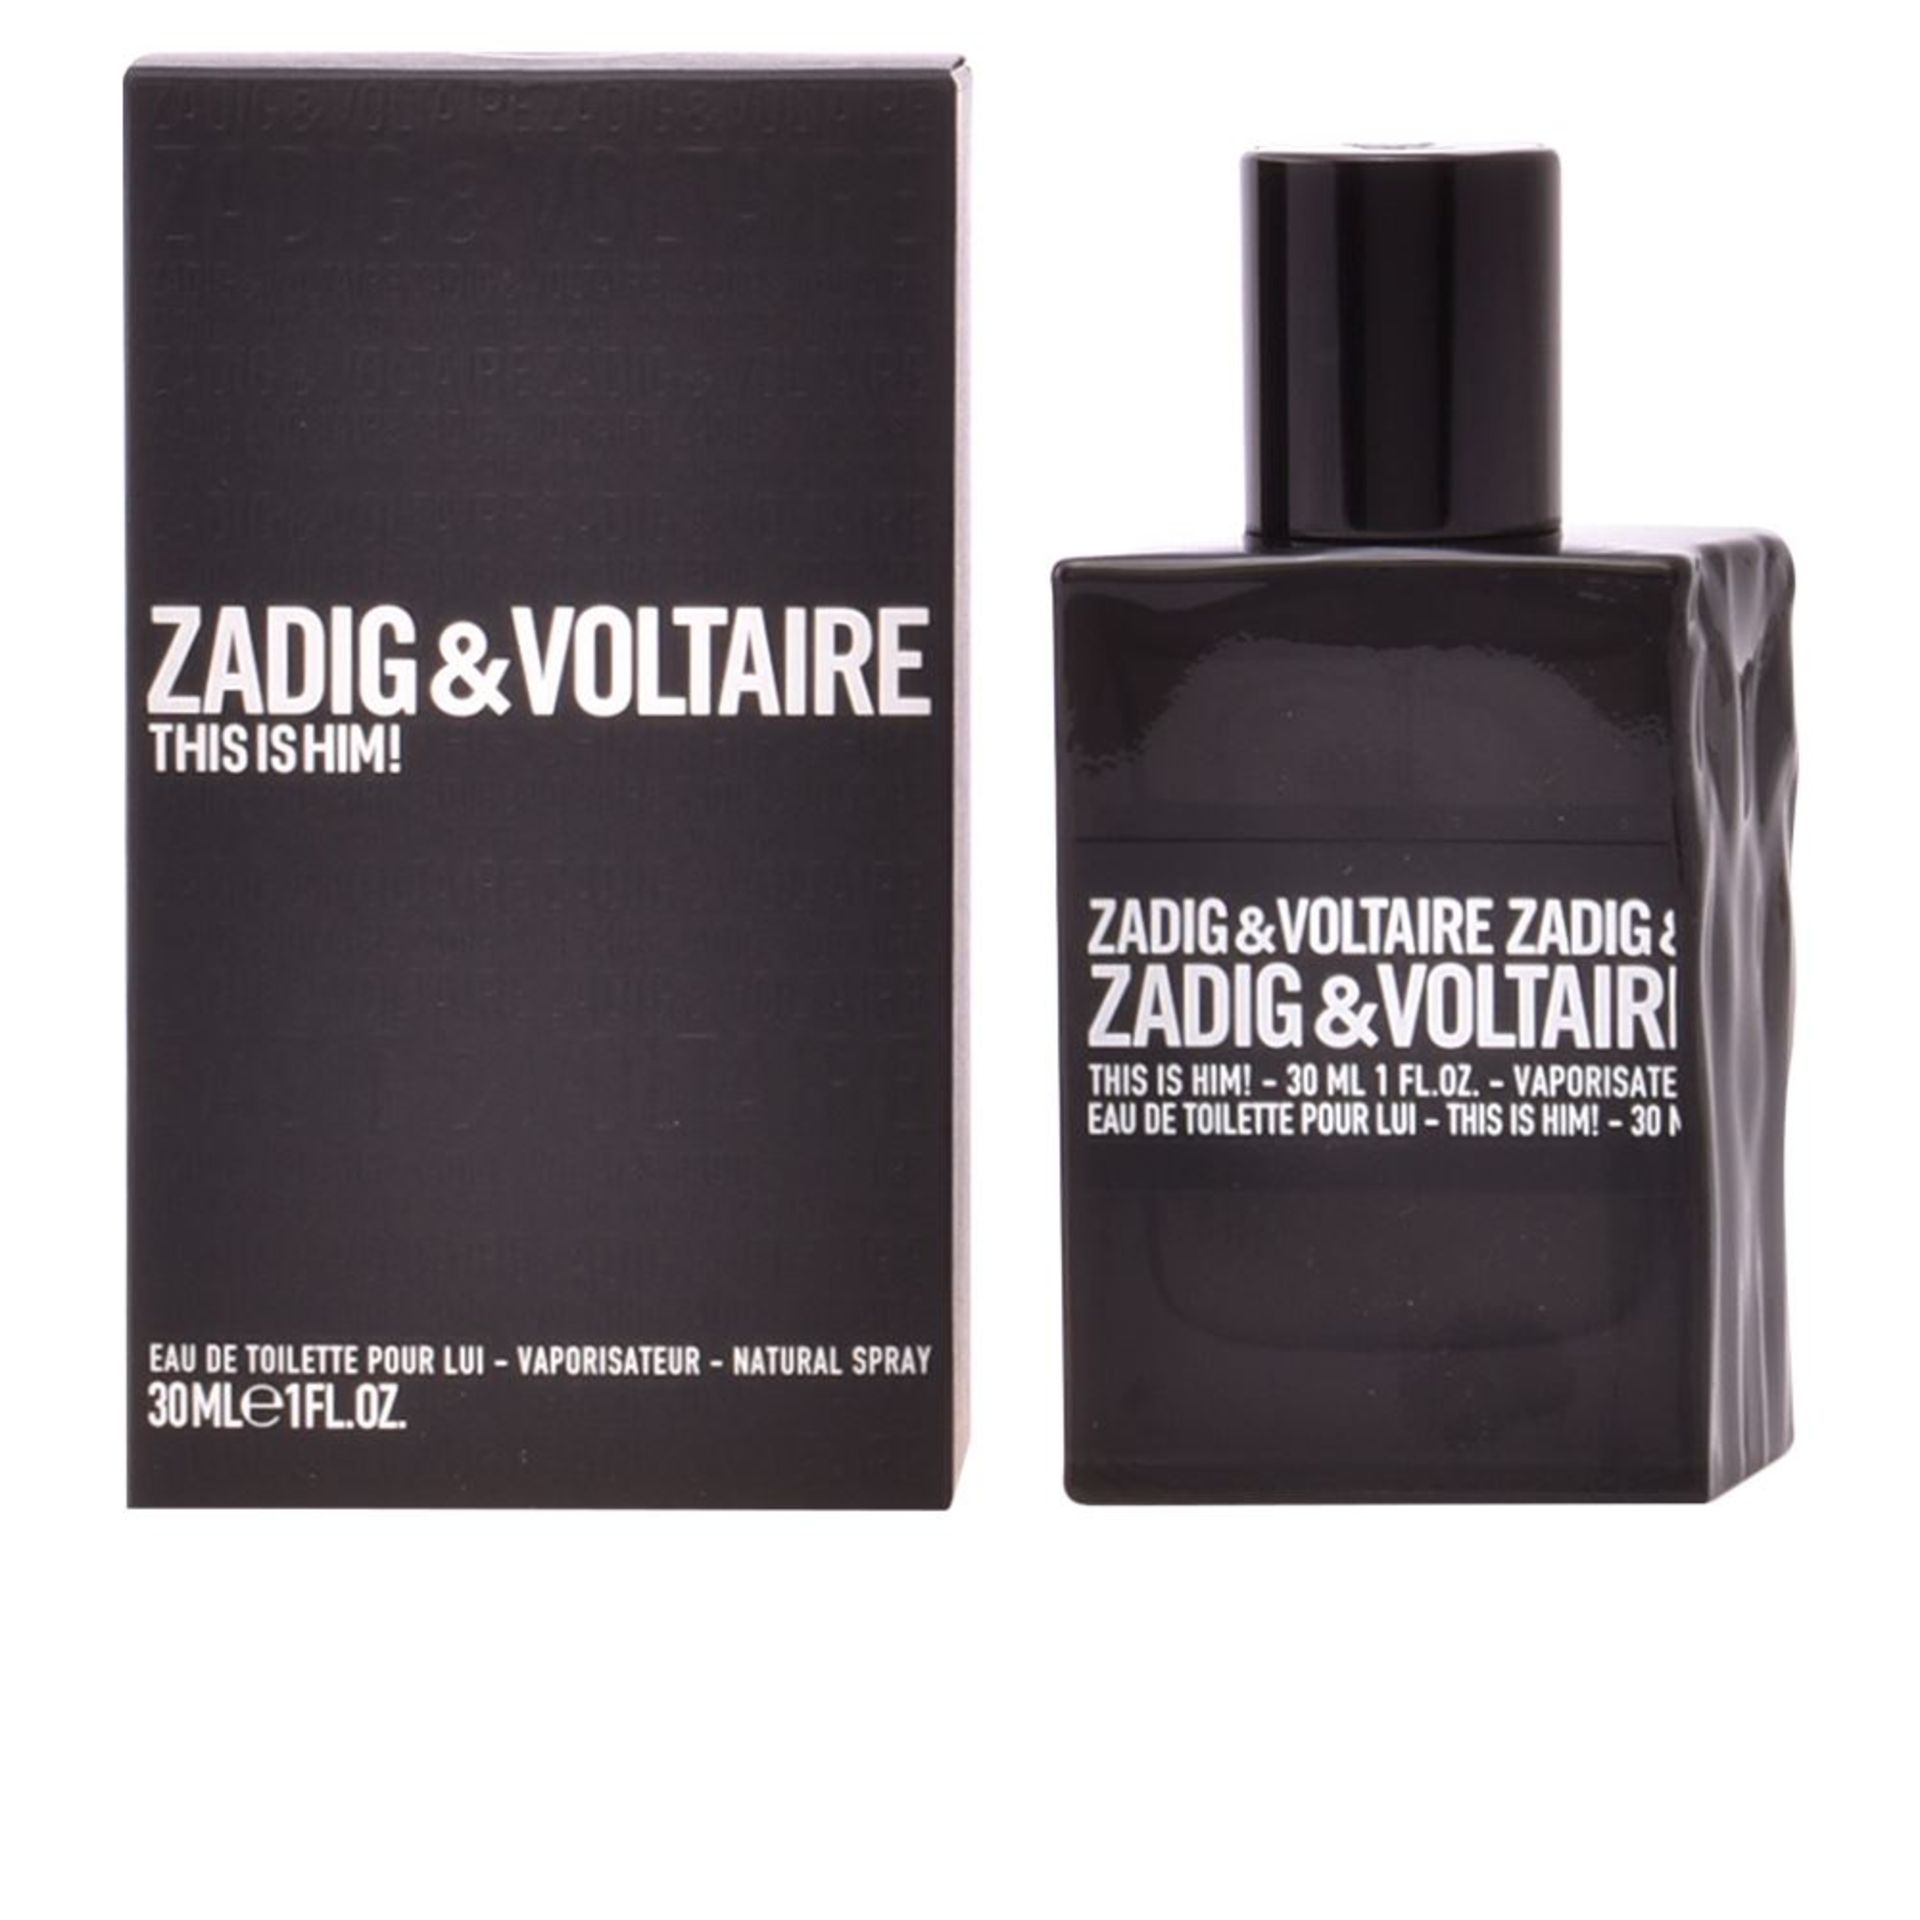 V Brand New Zadig & Voltaire This Is Him! 30ml EDT Spray